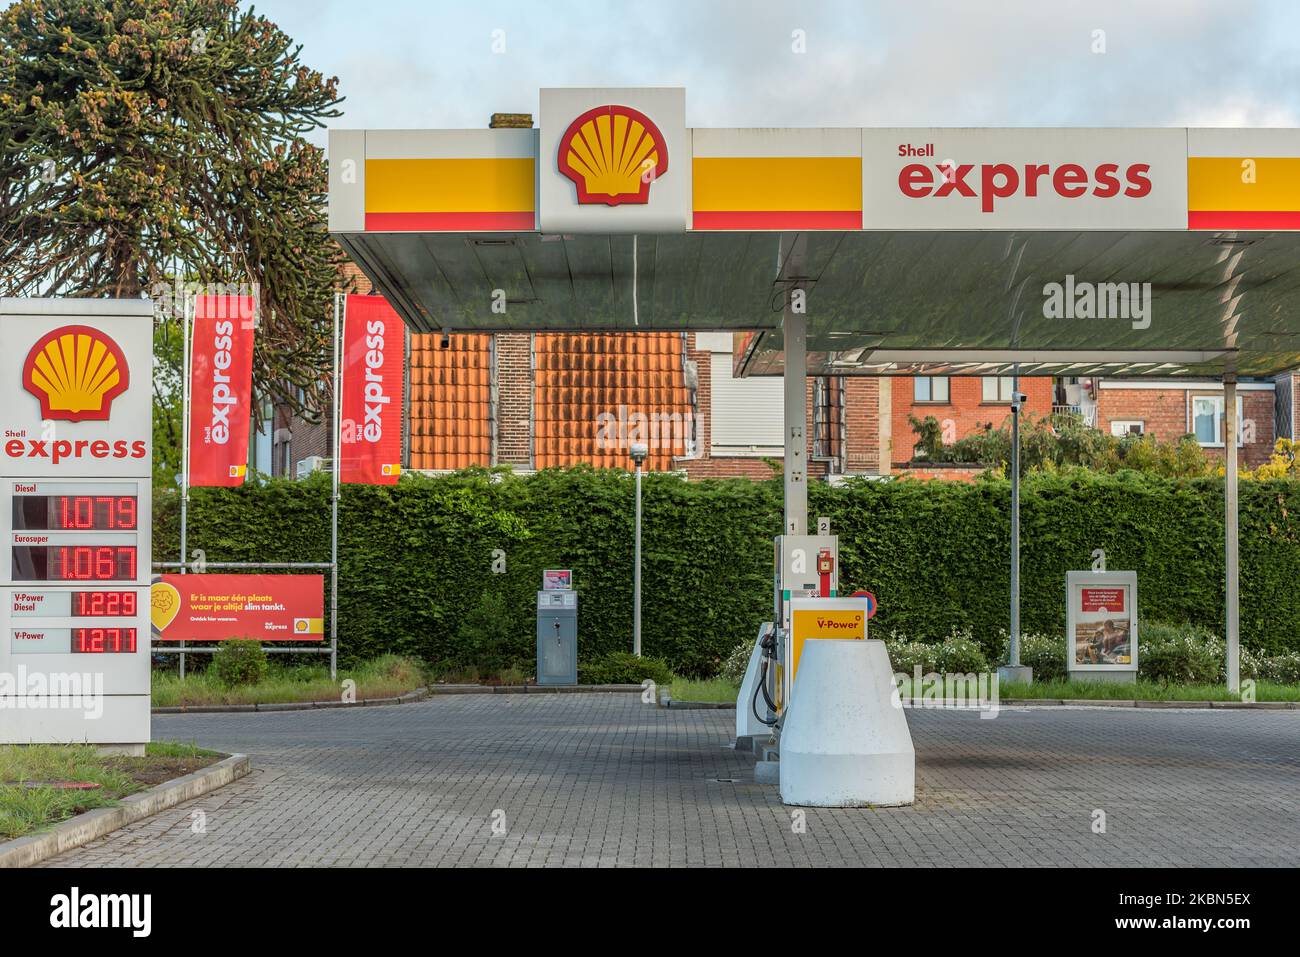 General view of fuel pump stands at the Royal Dutch Shell gas station in Brussels, Belgium 30 April 2020. Following the collapse in global oil demand due to the coronavirus pandemic, Shell slashed its dividend for the first time since 1945, chief executive Ben van Beurden said in a statement on Thursday. Oil companies have clung on to dividend payouts as demand plummets with government lockdowns. (Photo by Jonathan Raa/NurPhoto) Stock Photo